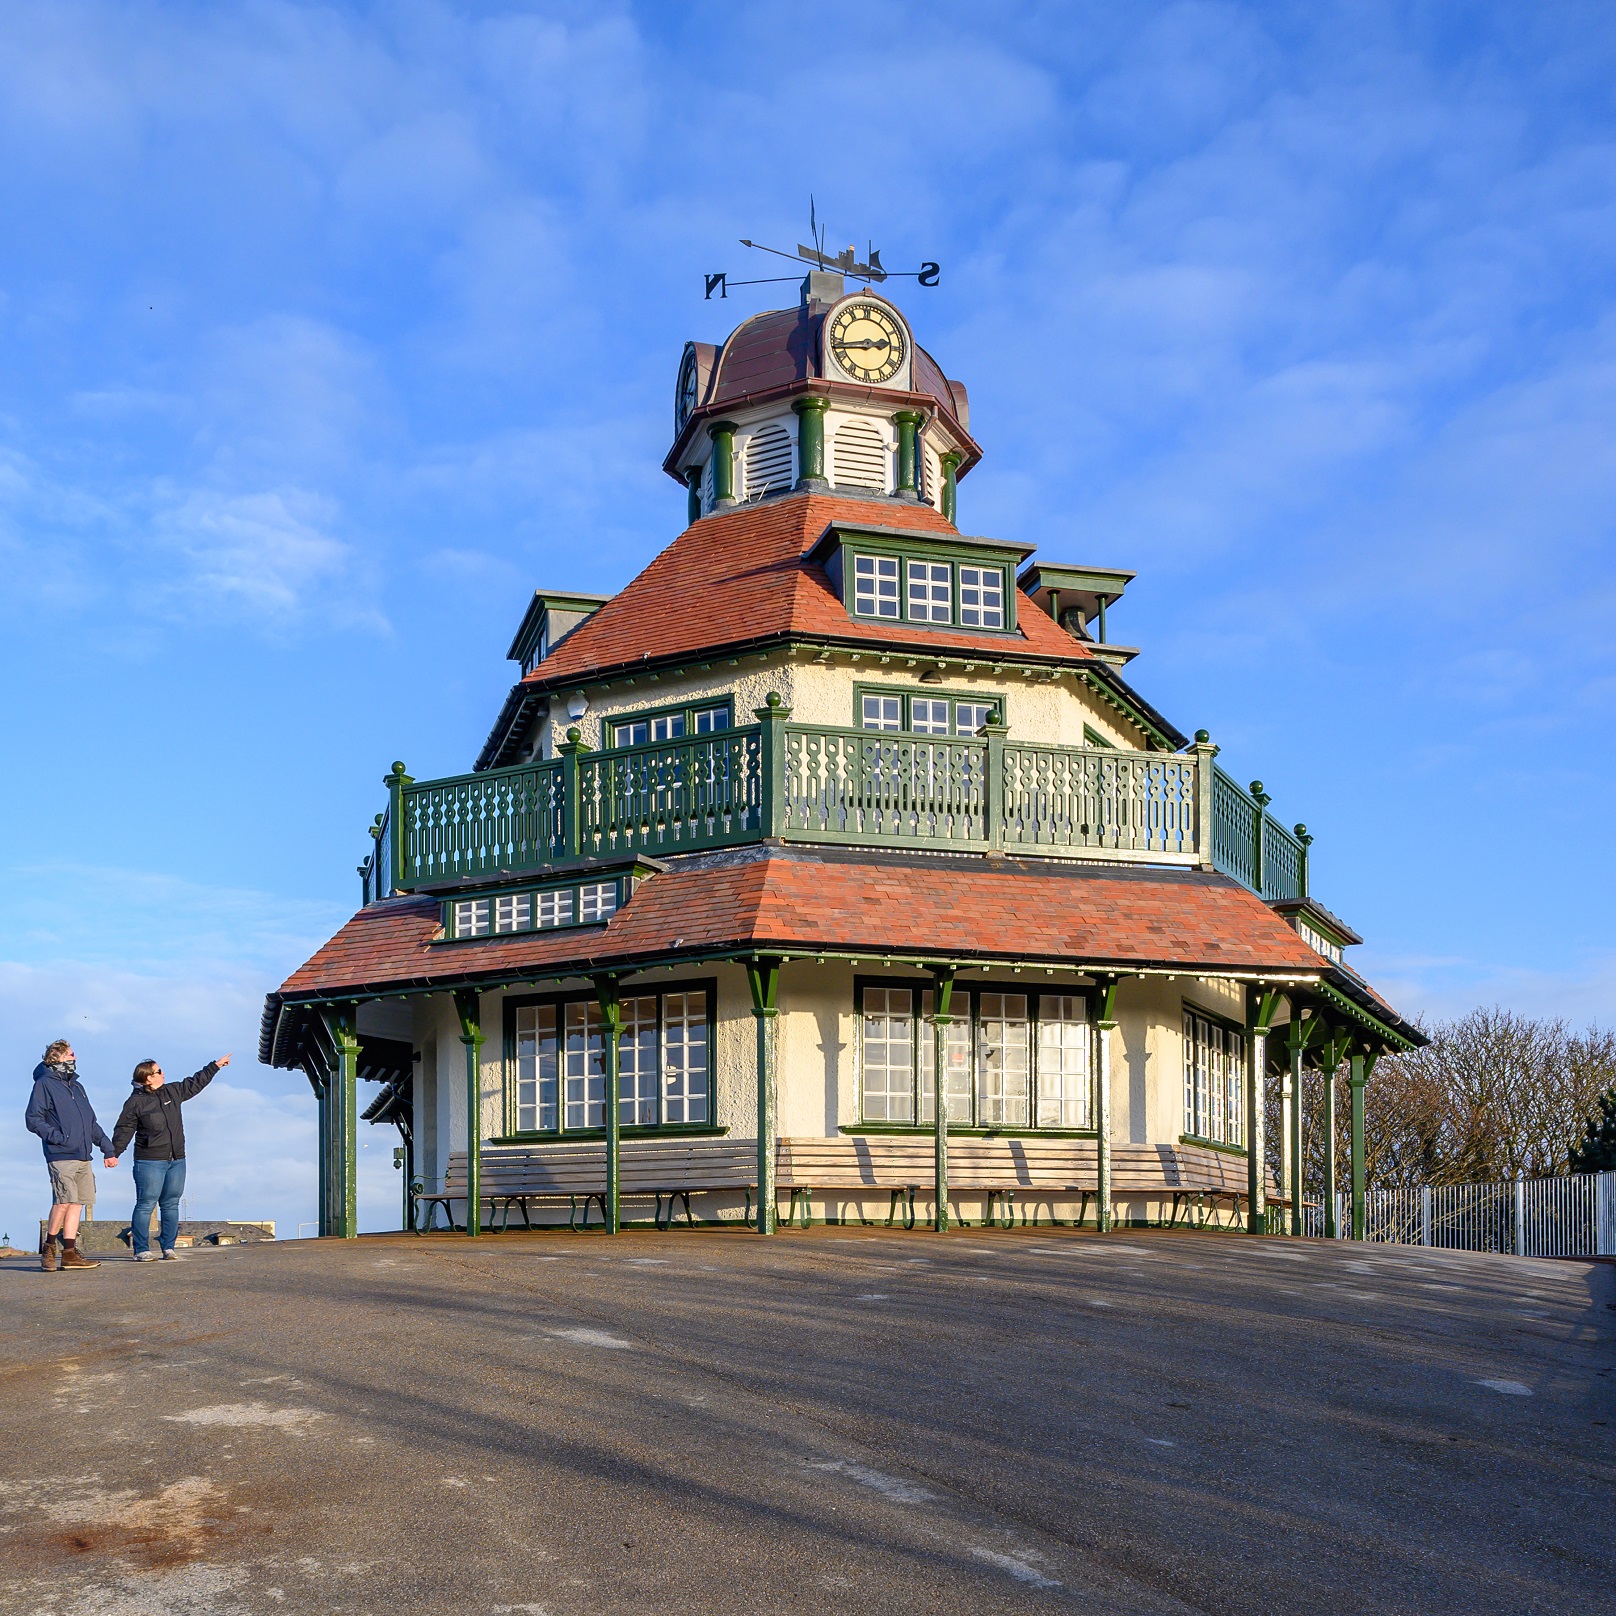 The refurbished pavillion on the Mount at Fleetwood